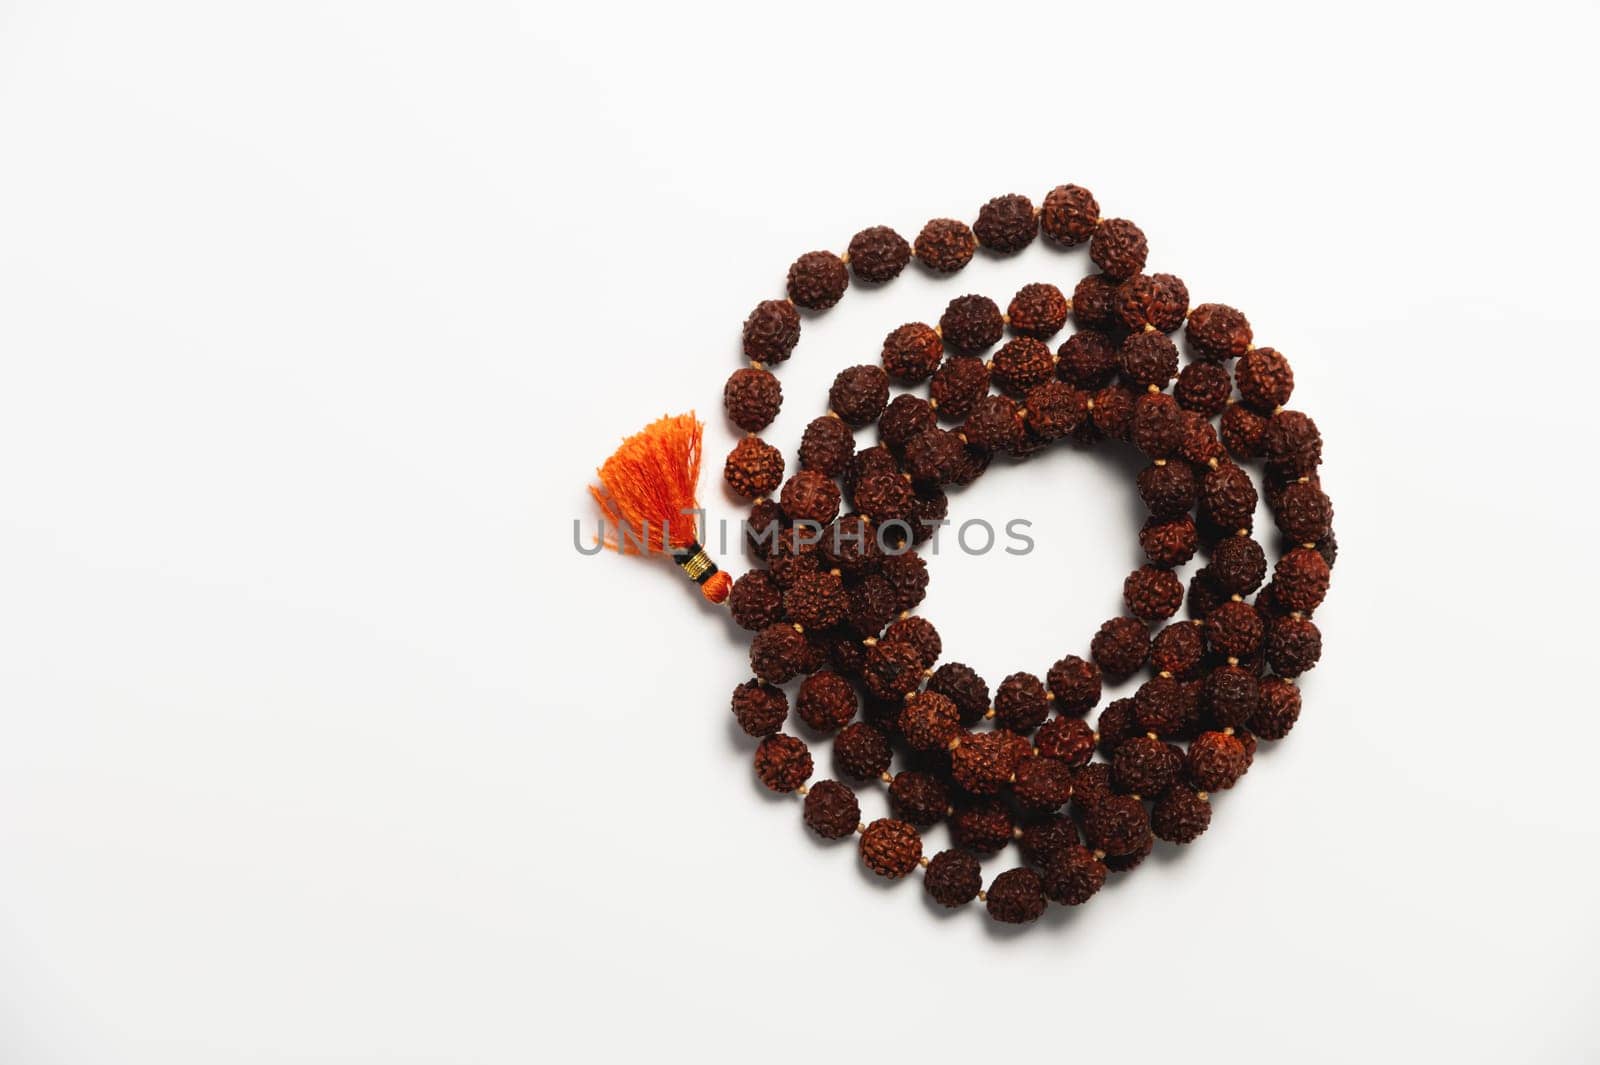 Wooden church rosary made of dark wood on a white background. Church rosary for prayer close-up.